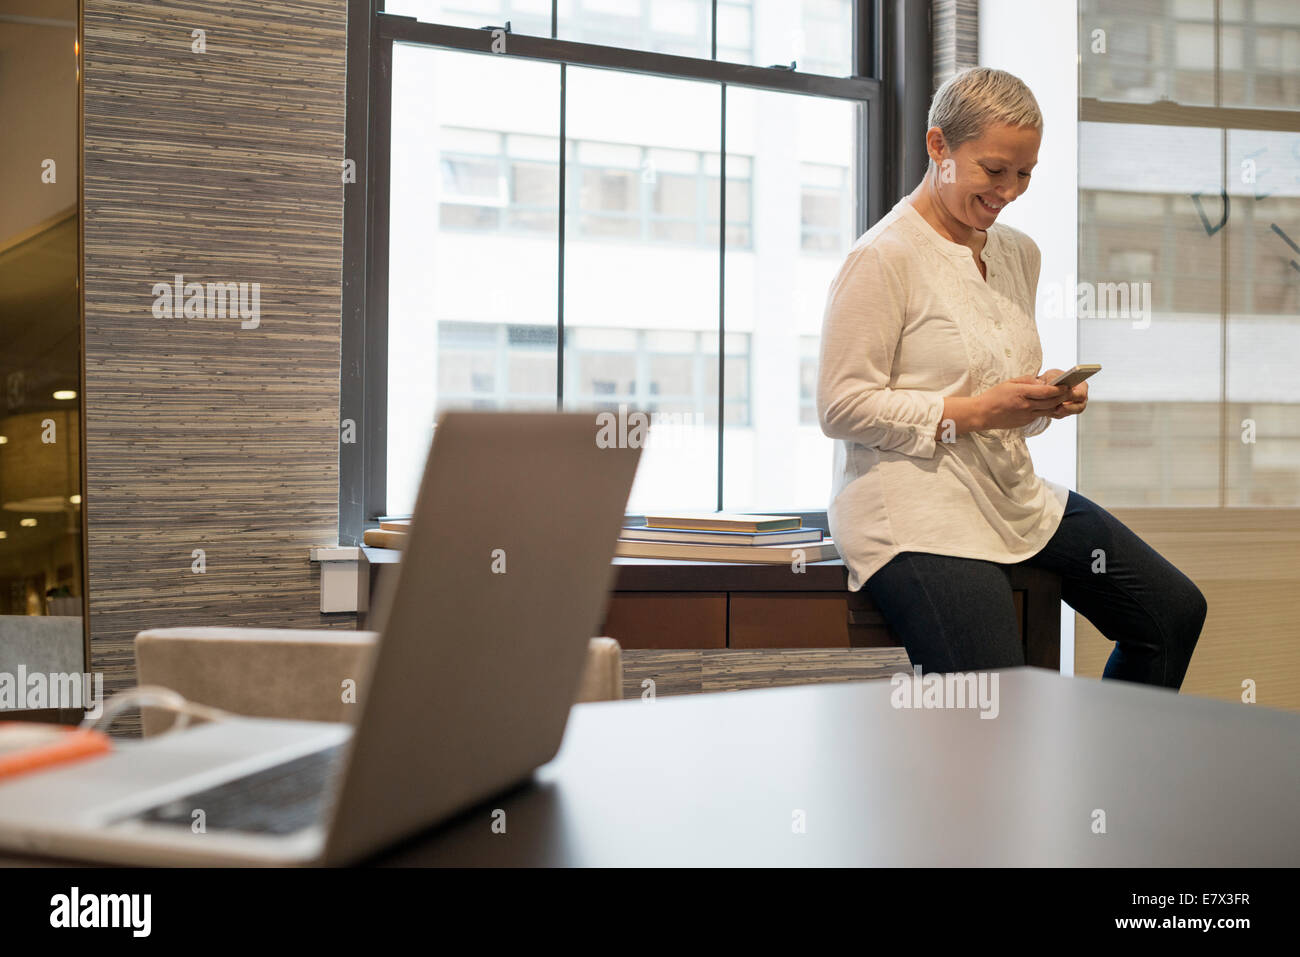 Office life.A woman seated on the edge of her desk using a digital tablet. Stock Photo